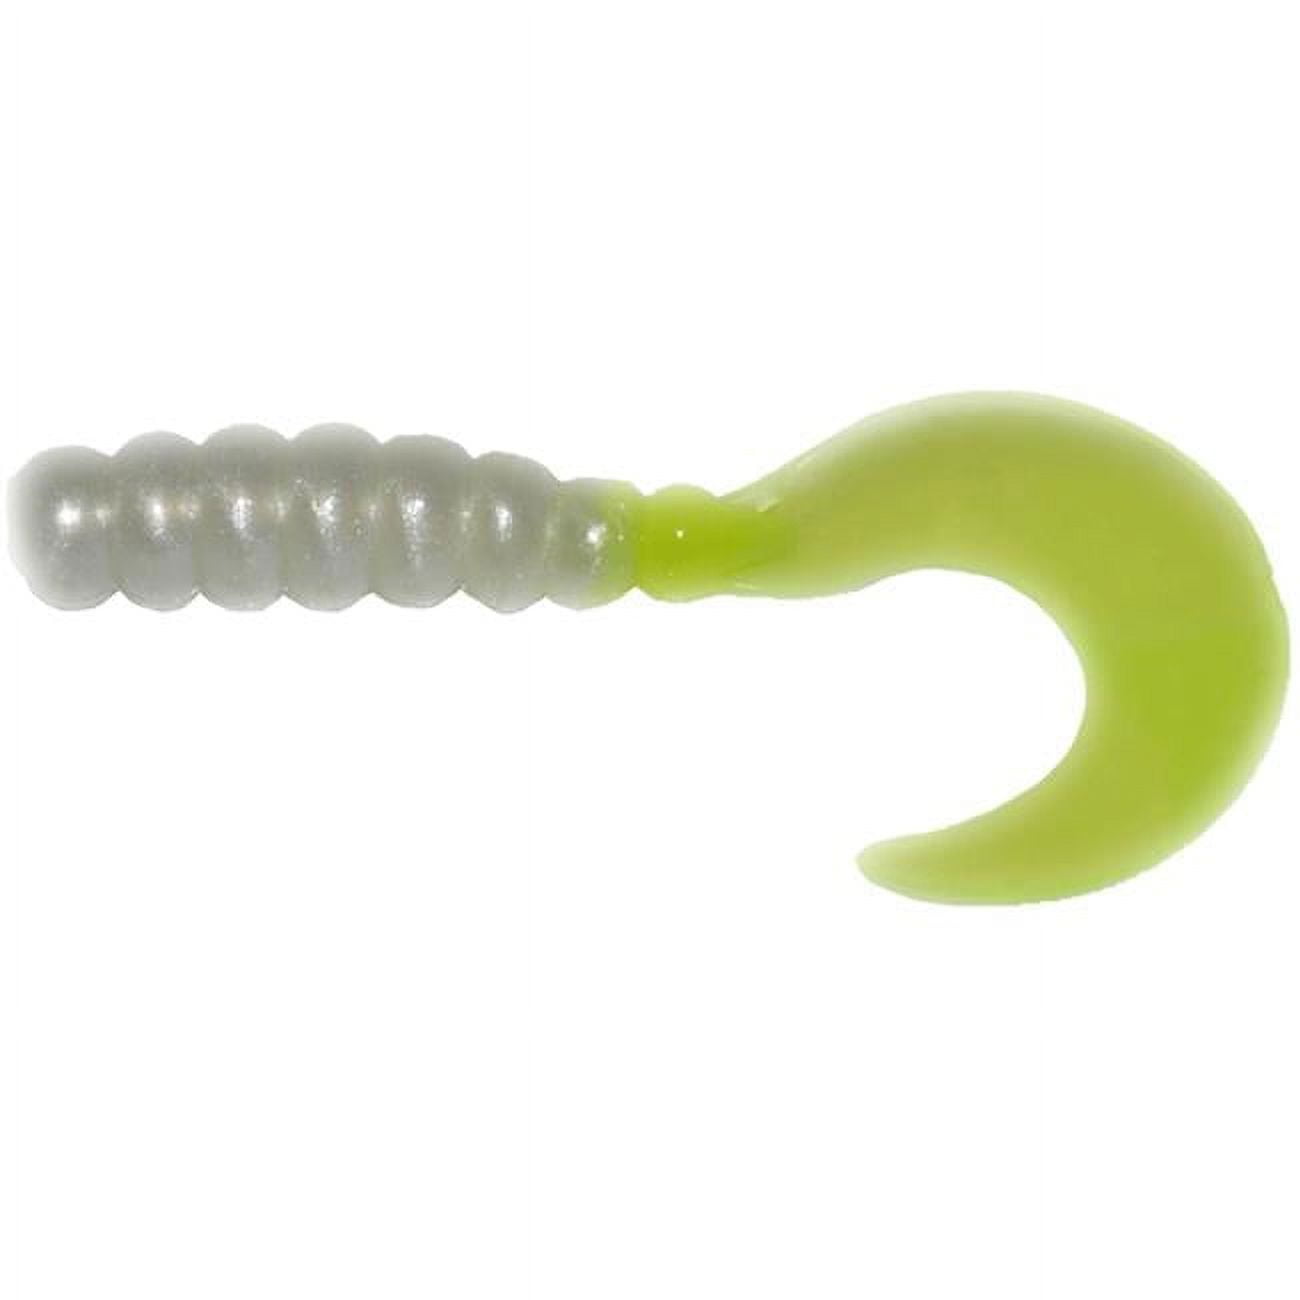 Big Bite Baits FG228 2 in. Fat Grub, Pearl & Chartreuse - Pack of 10